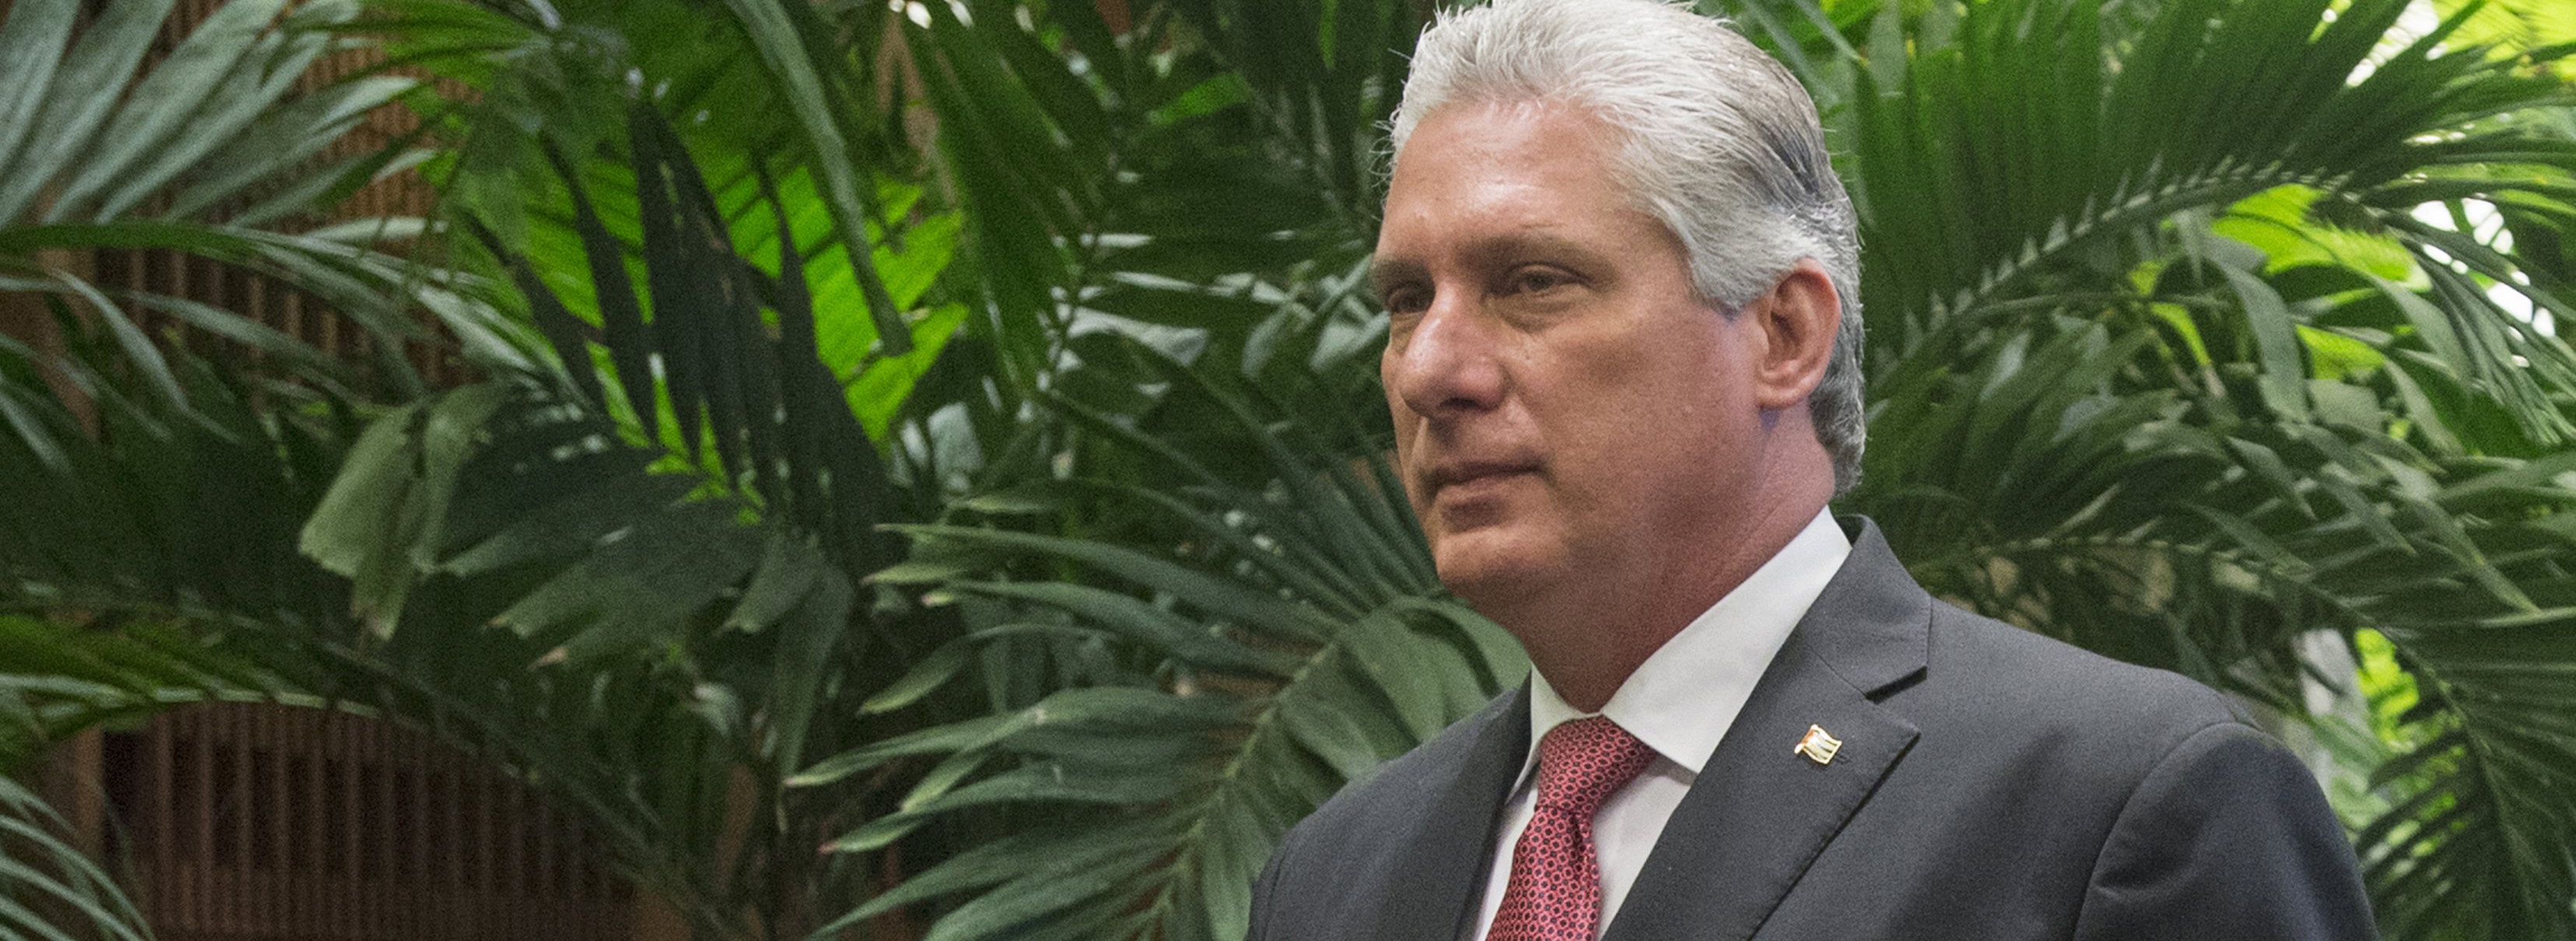 Miguel Diaz-Canel confirmed as Cuba's new president